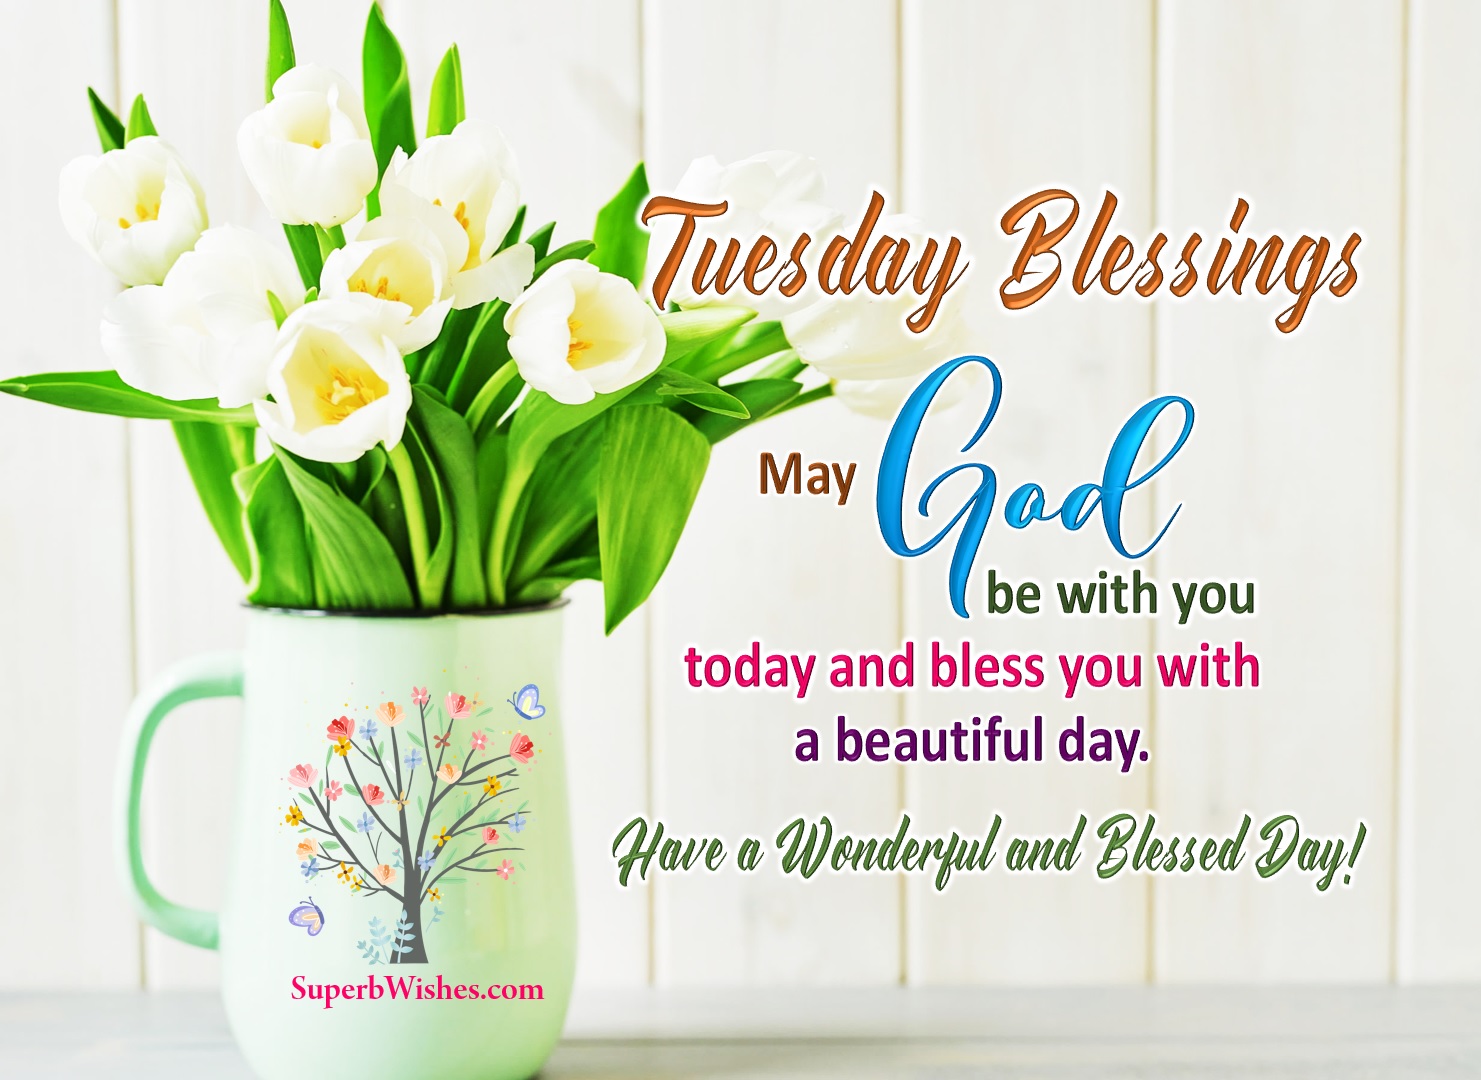 Tuesday Blessings Images - May God Be With You | SuperbWishes.com